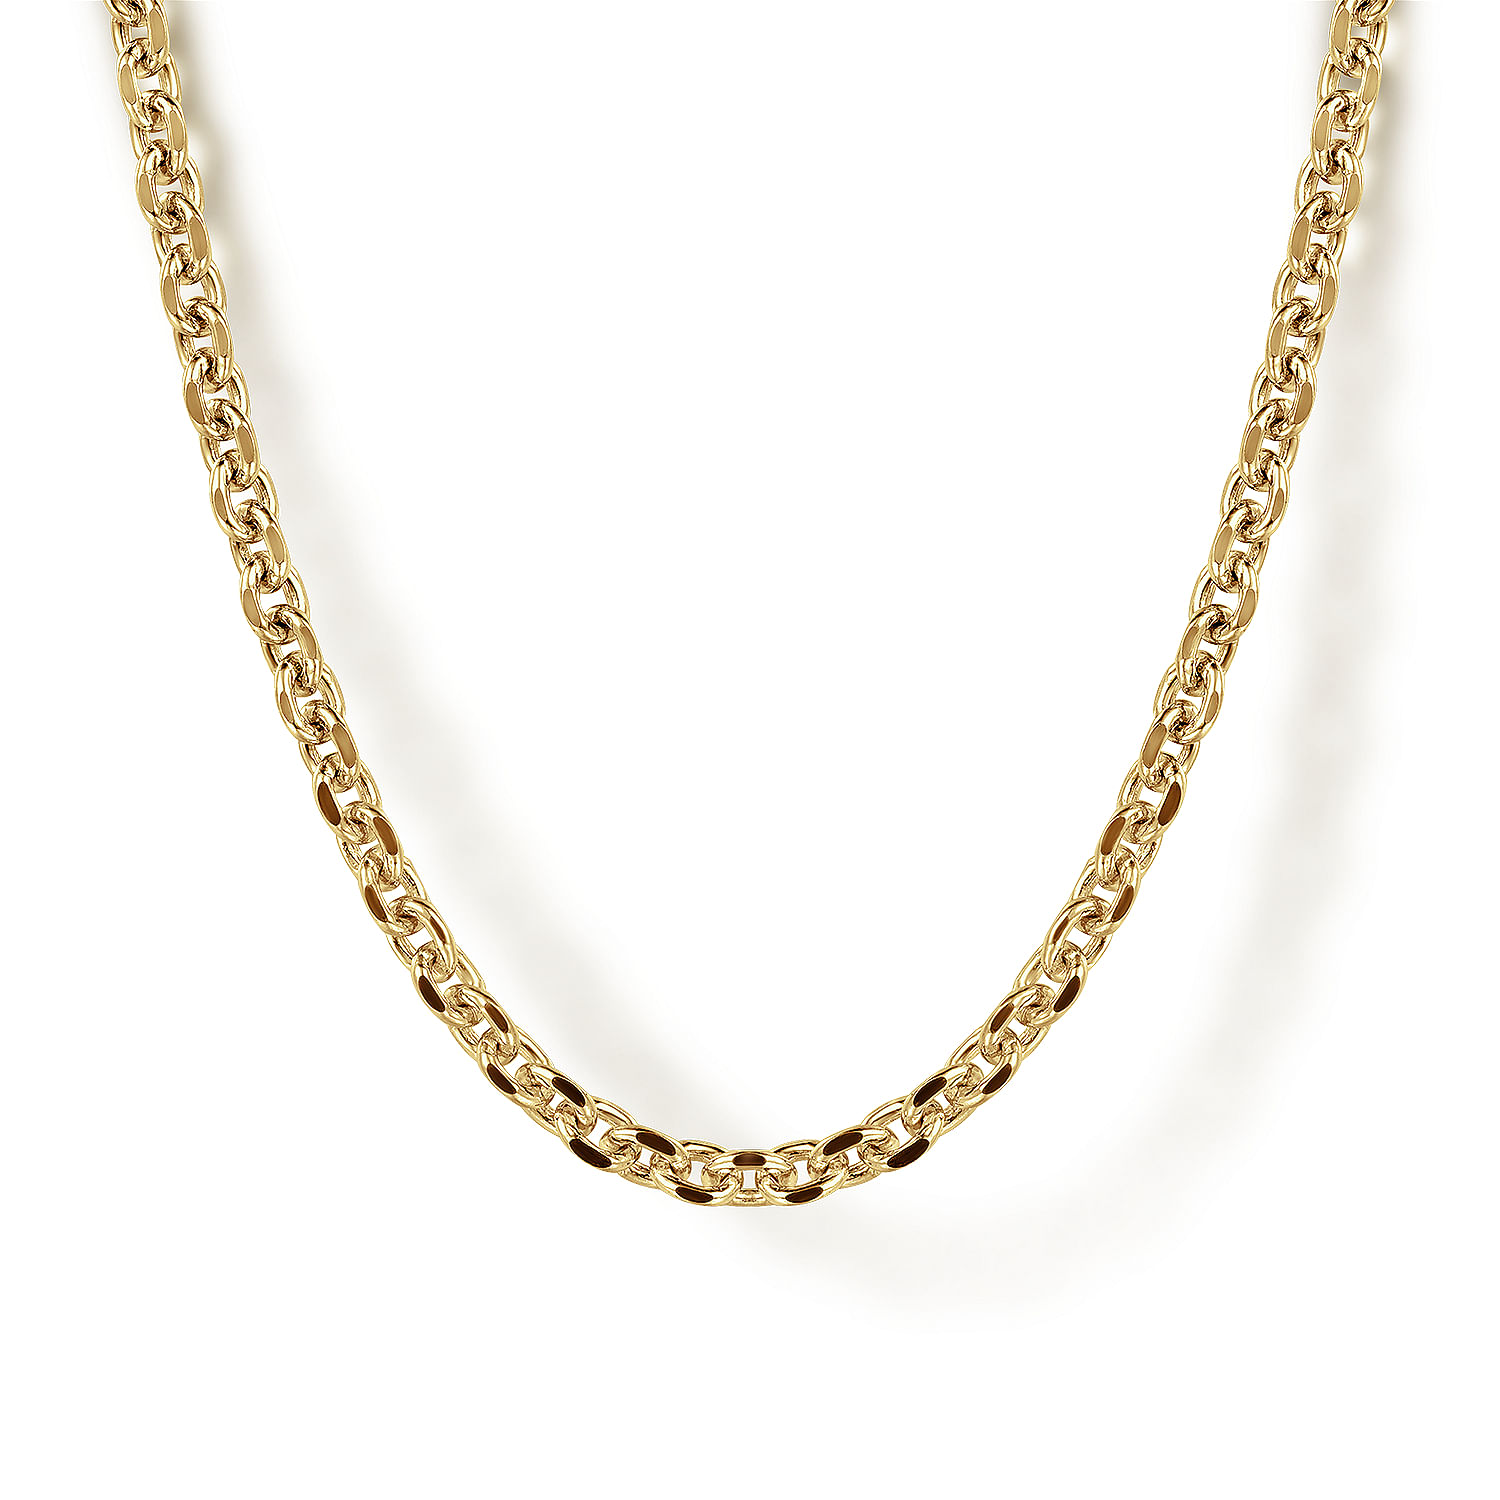 22 Inch 14K Yellow Gold Mens Link Chain Necklace